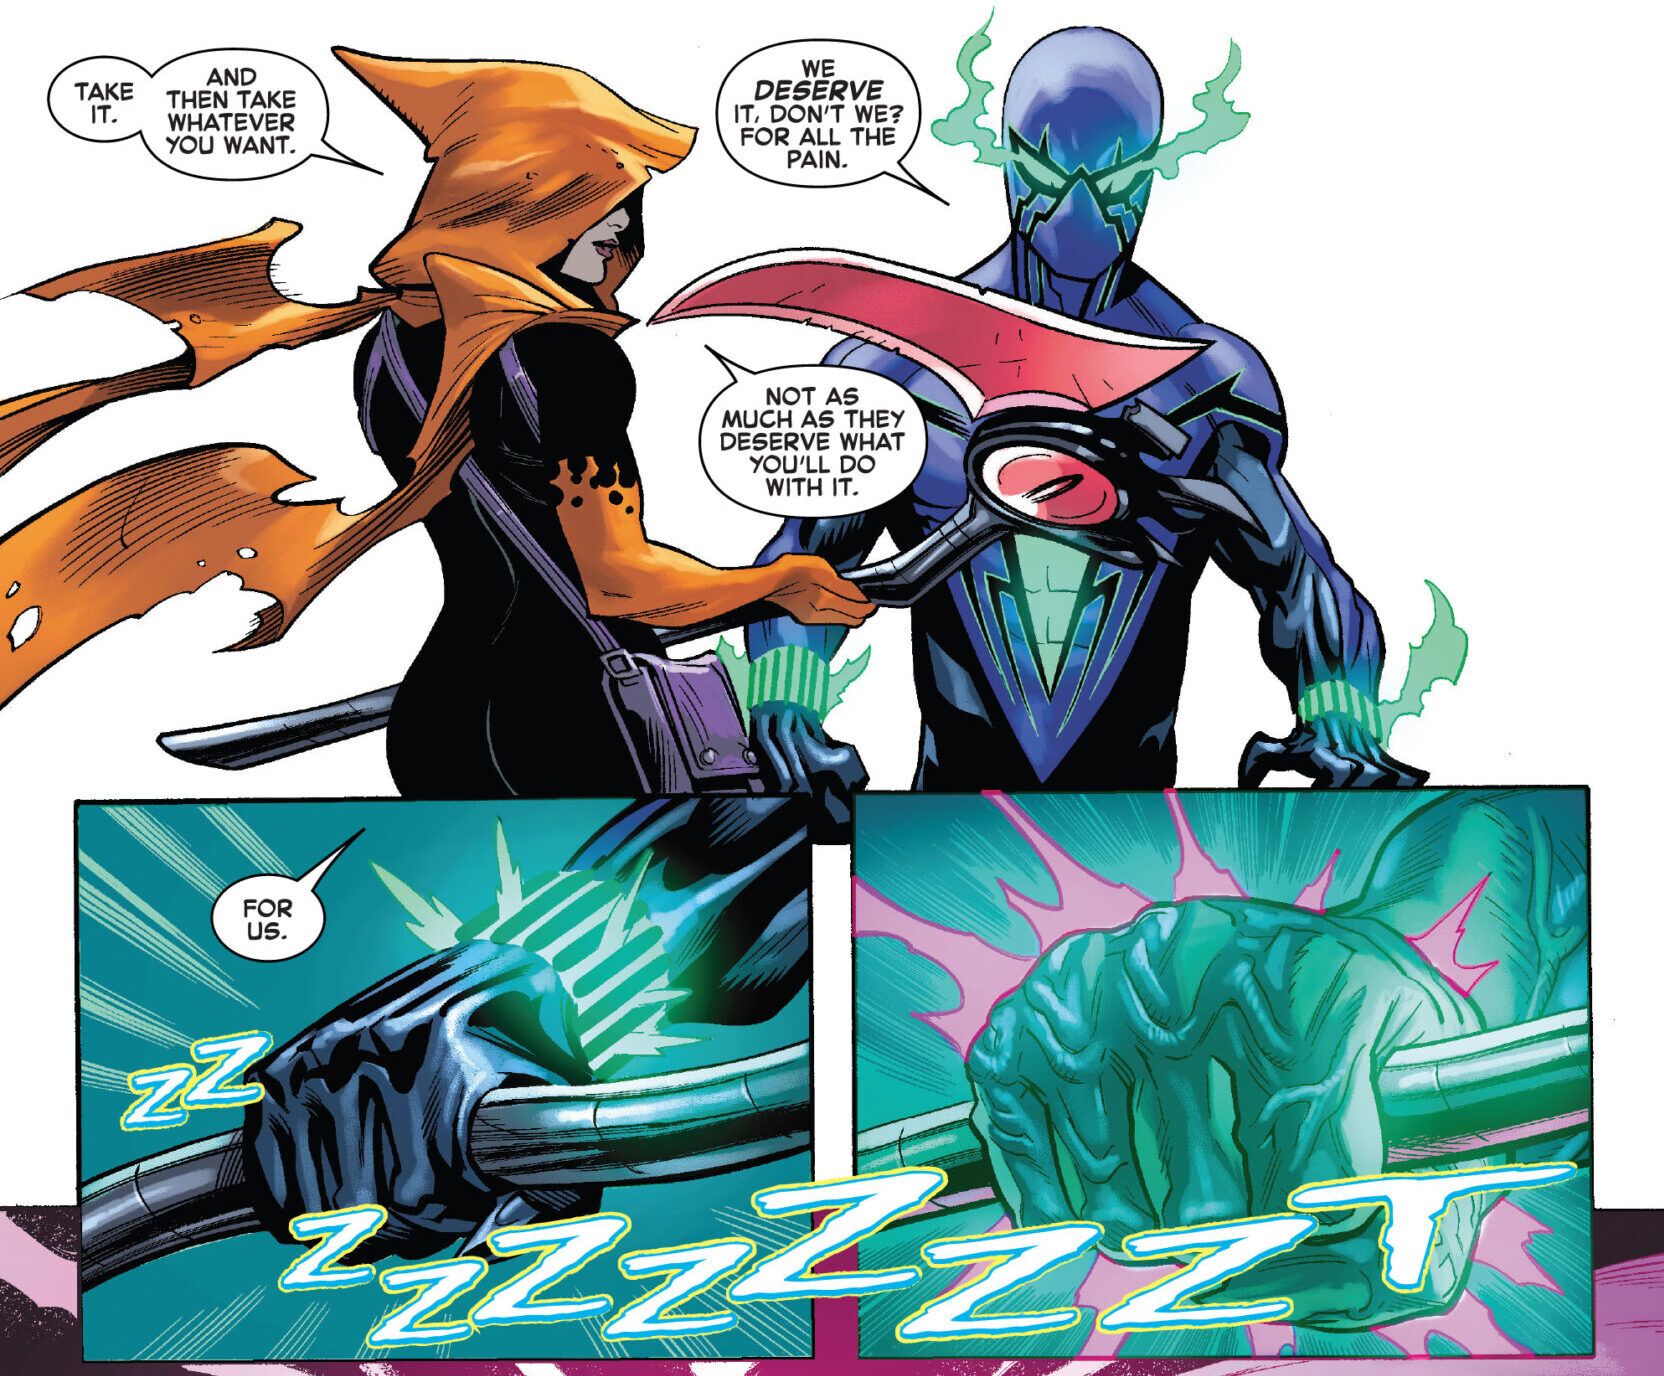 Amazing Spider-Man #18 spoilers 5 Goblin Queen Chasm Hallows' Eve